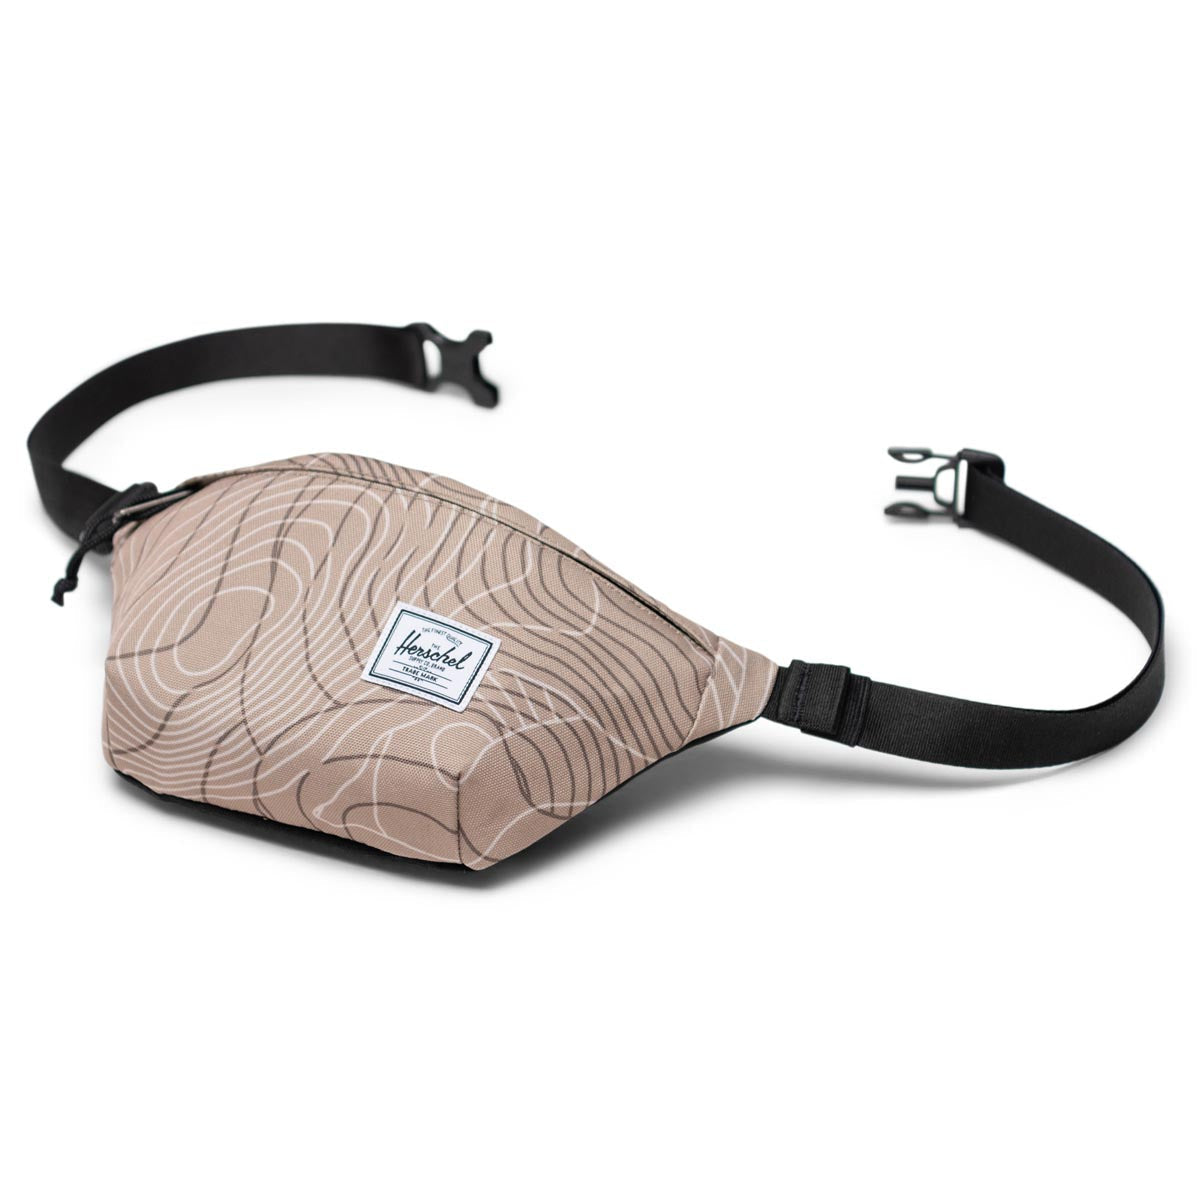 Herschel Supply Classic Hip Bag - Twill Topography image 2